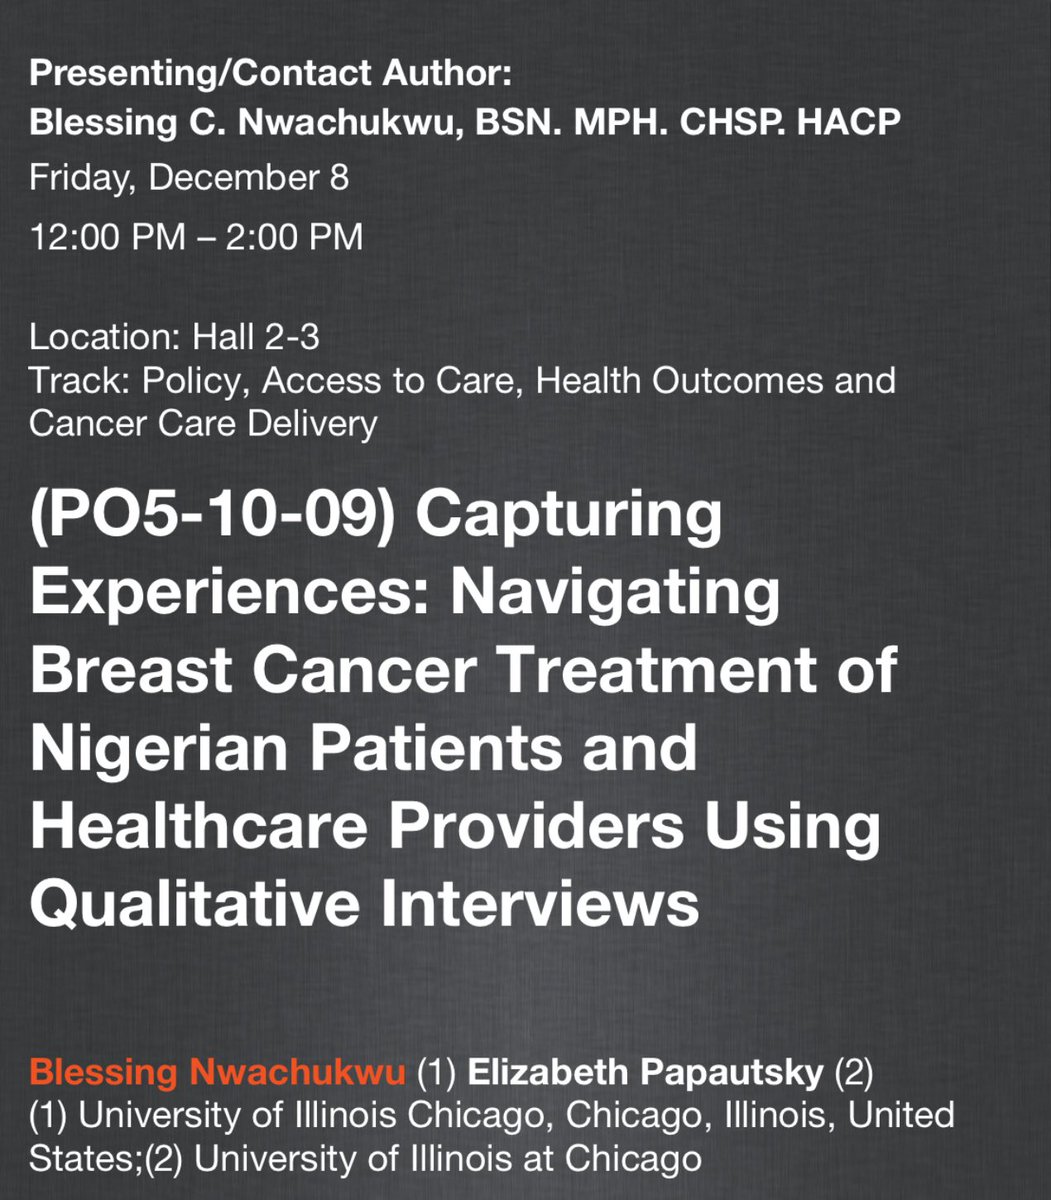 I will be participating in the 2023 San Antonio Breast Cancer Symposium (SABCS 2023). Our abstract on “Capturing Experiences: Navigating Breast Cancer Treatment of Nigerian Patients and Healthcare Providers Using
Qualitative Interviews” was selected to be presented. #sabcs2023